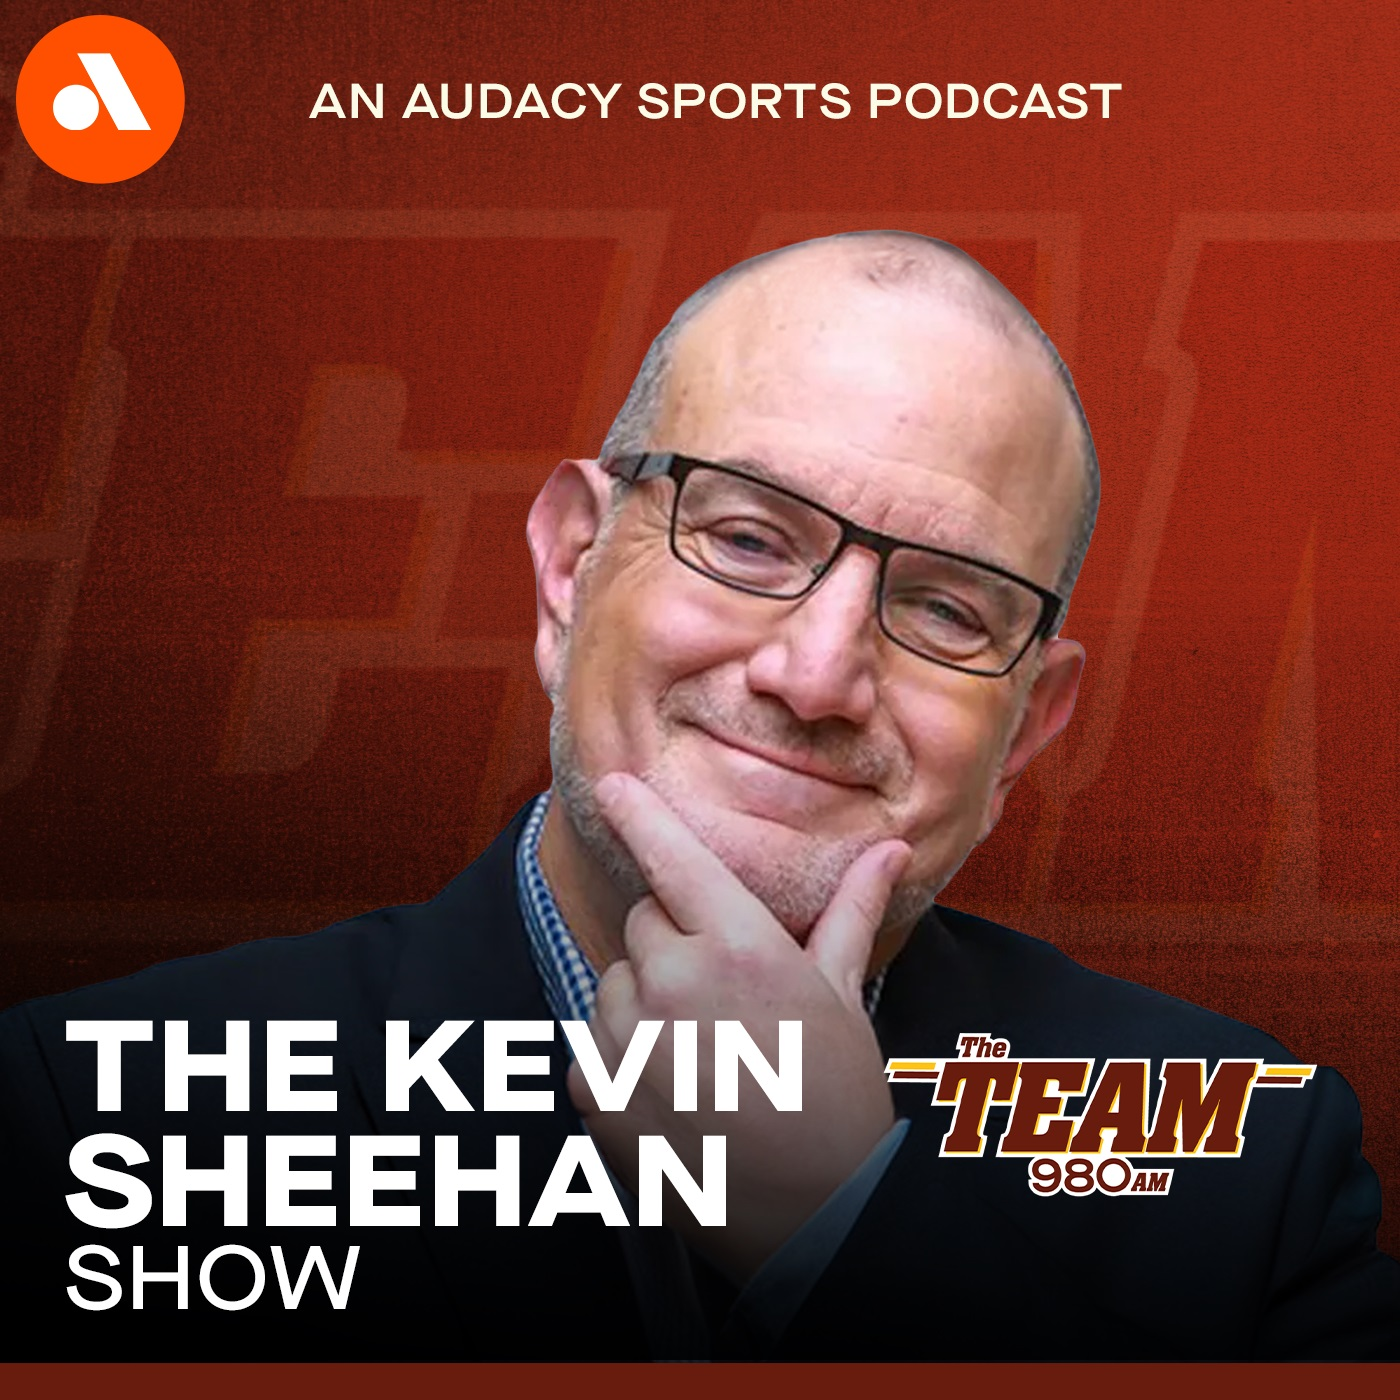 Did Kevin take it easy on Kyle Shanahan?